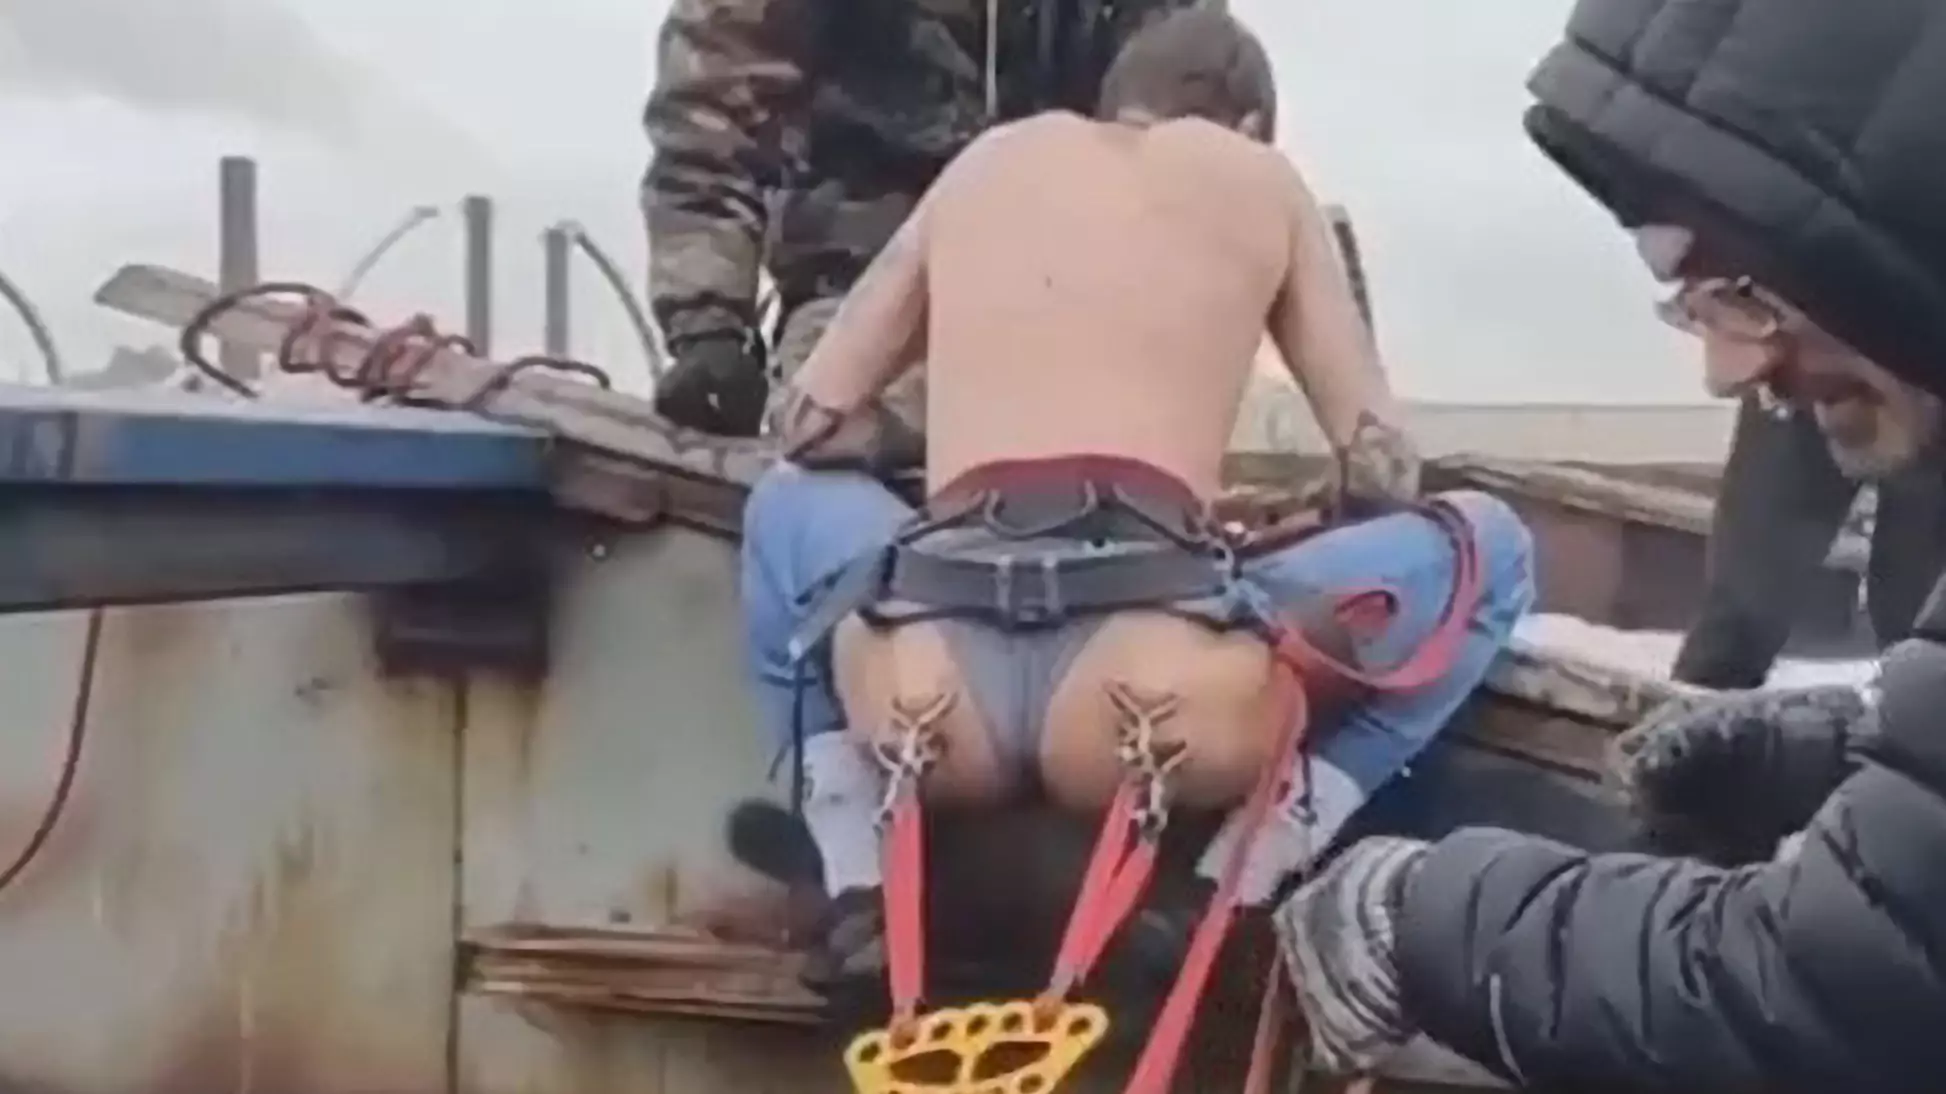 Man Does Bungee Jump With Cords Attached To Bum Piercings 